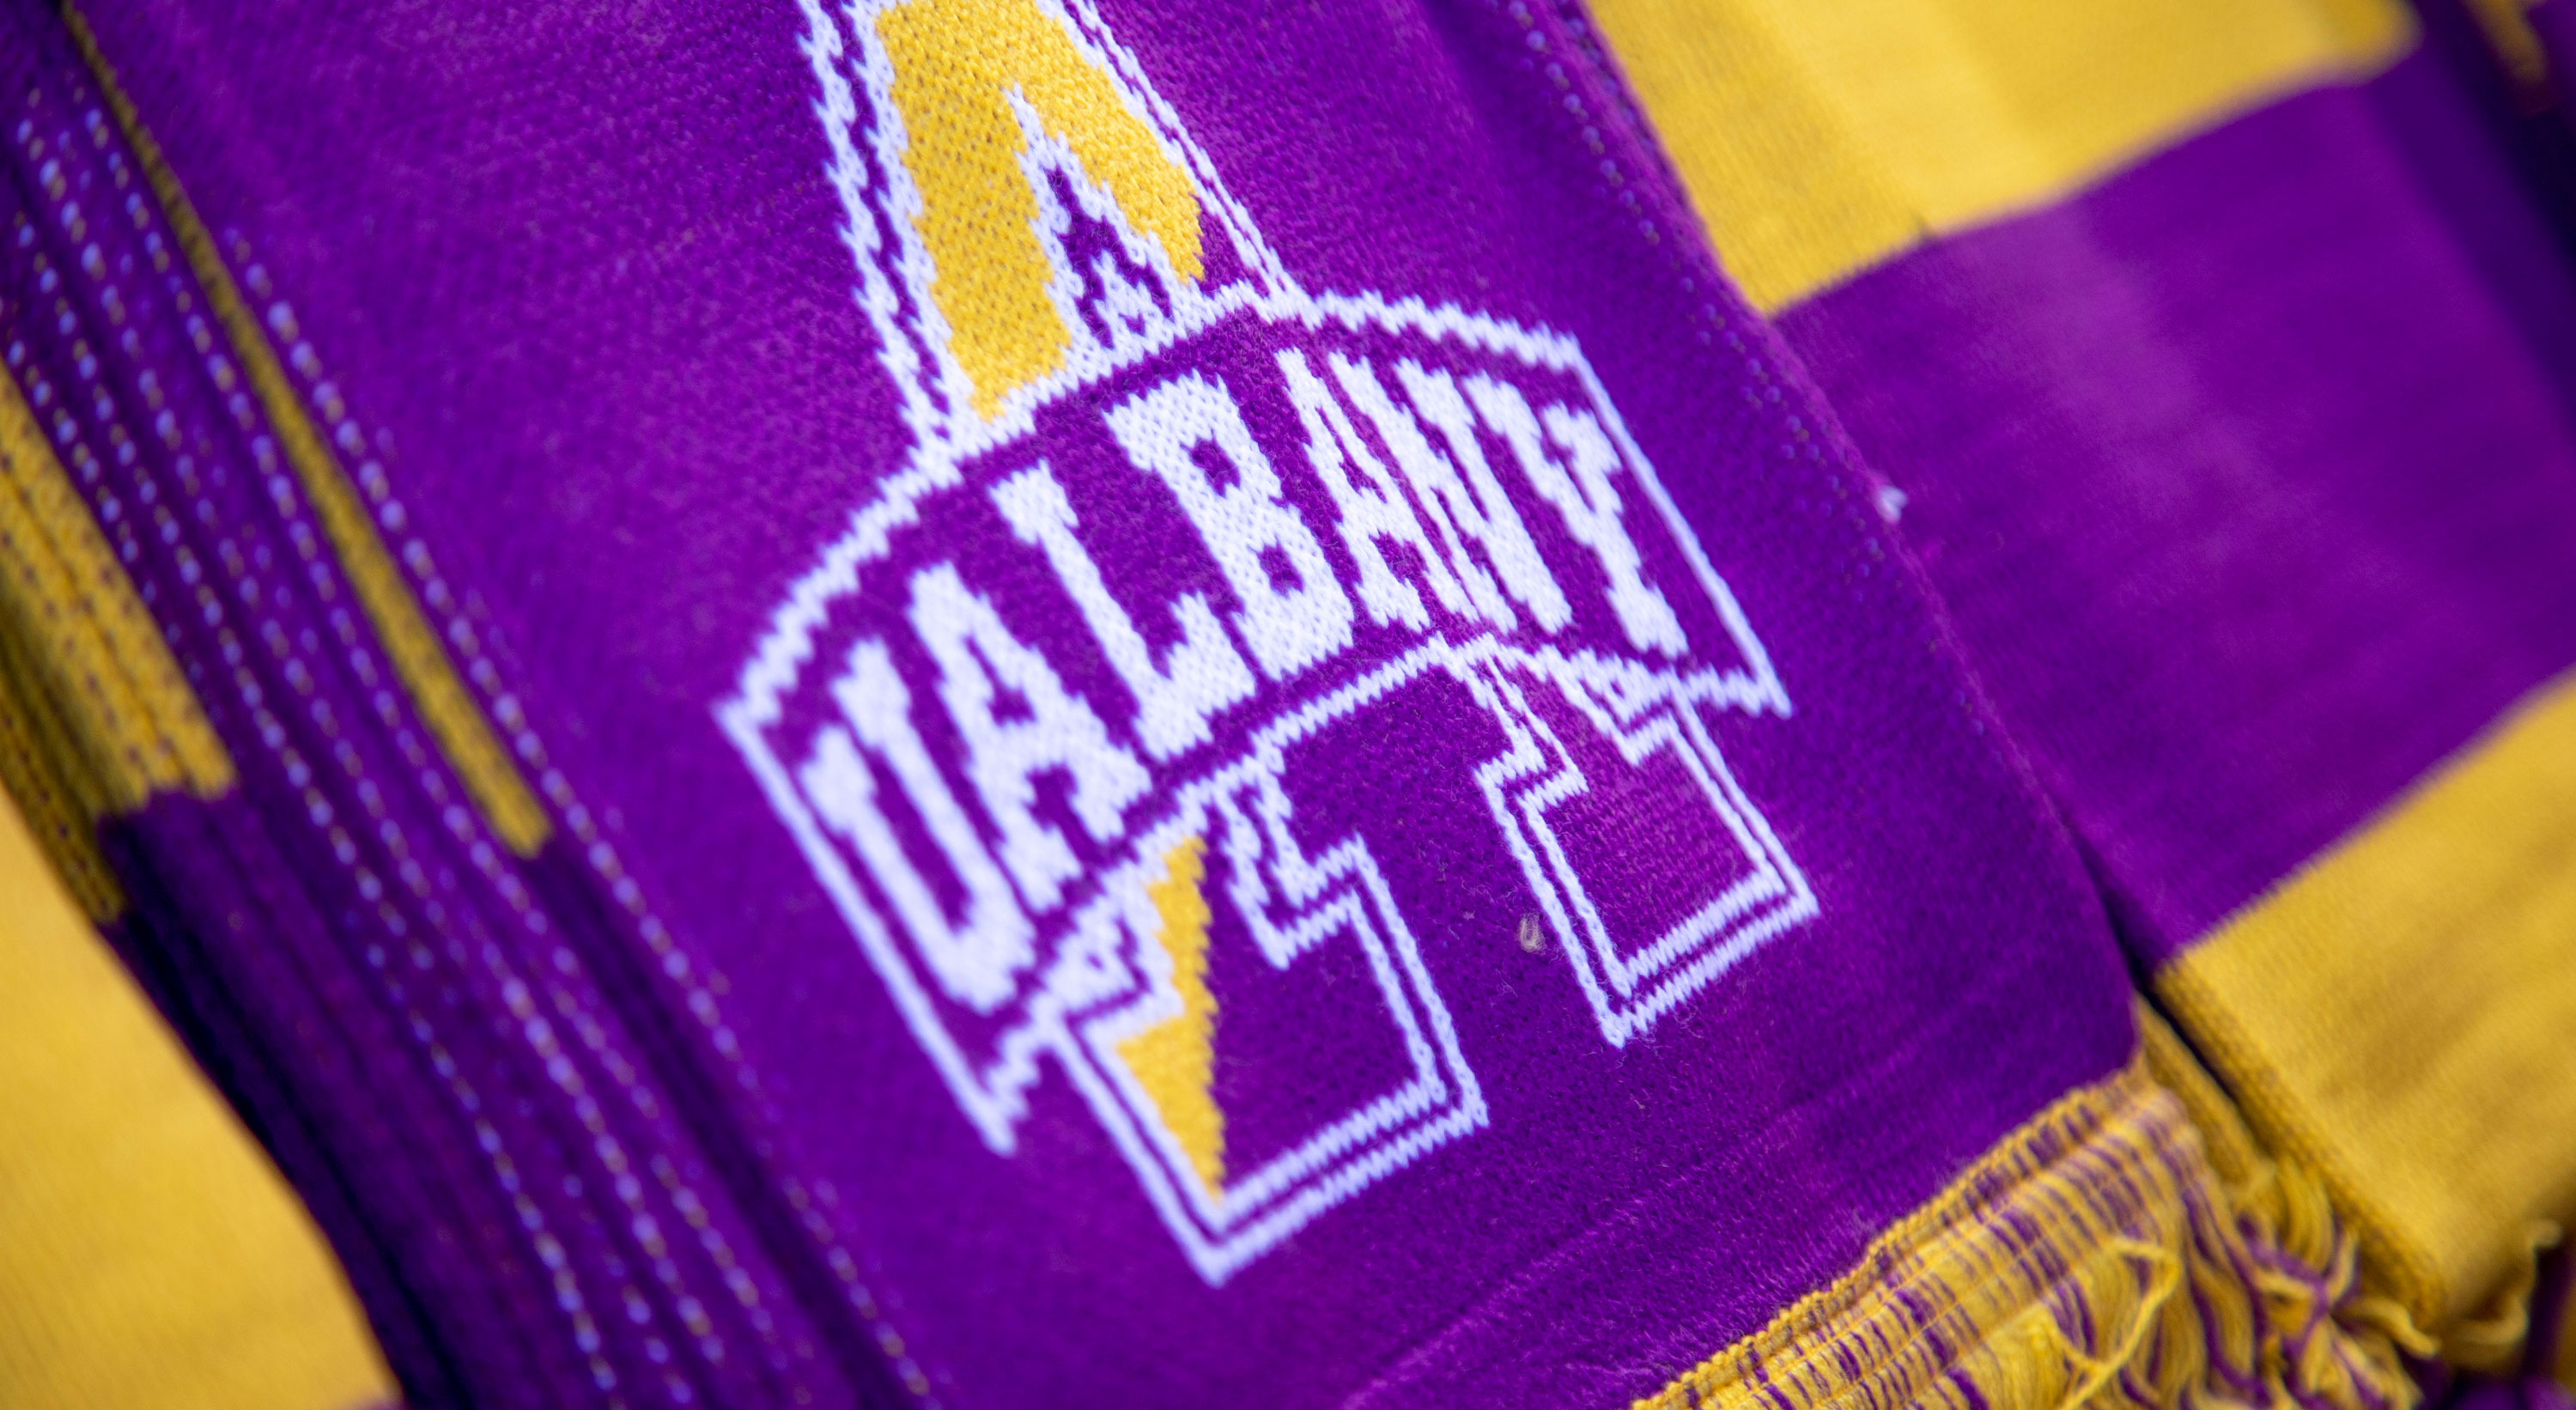 The UAlbany logo on a purple and gold knit scarf.